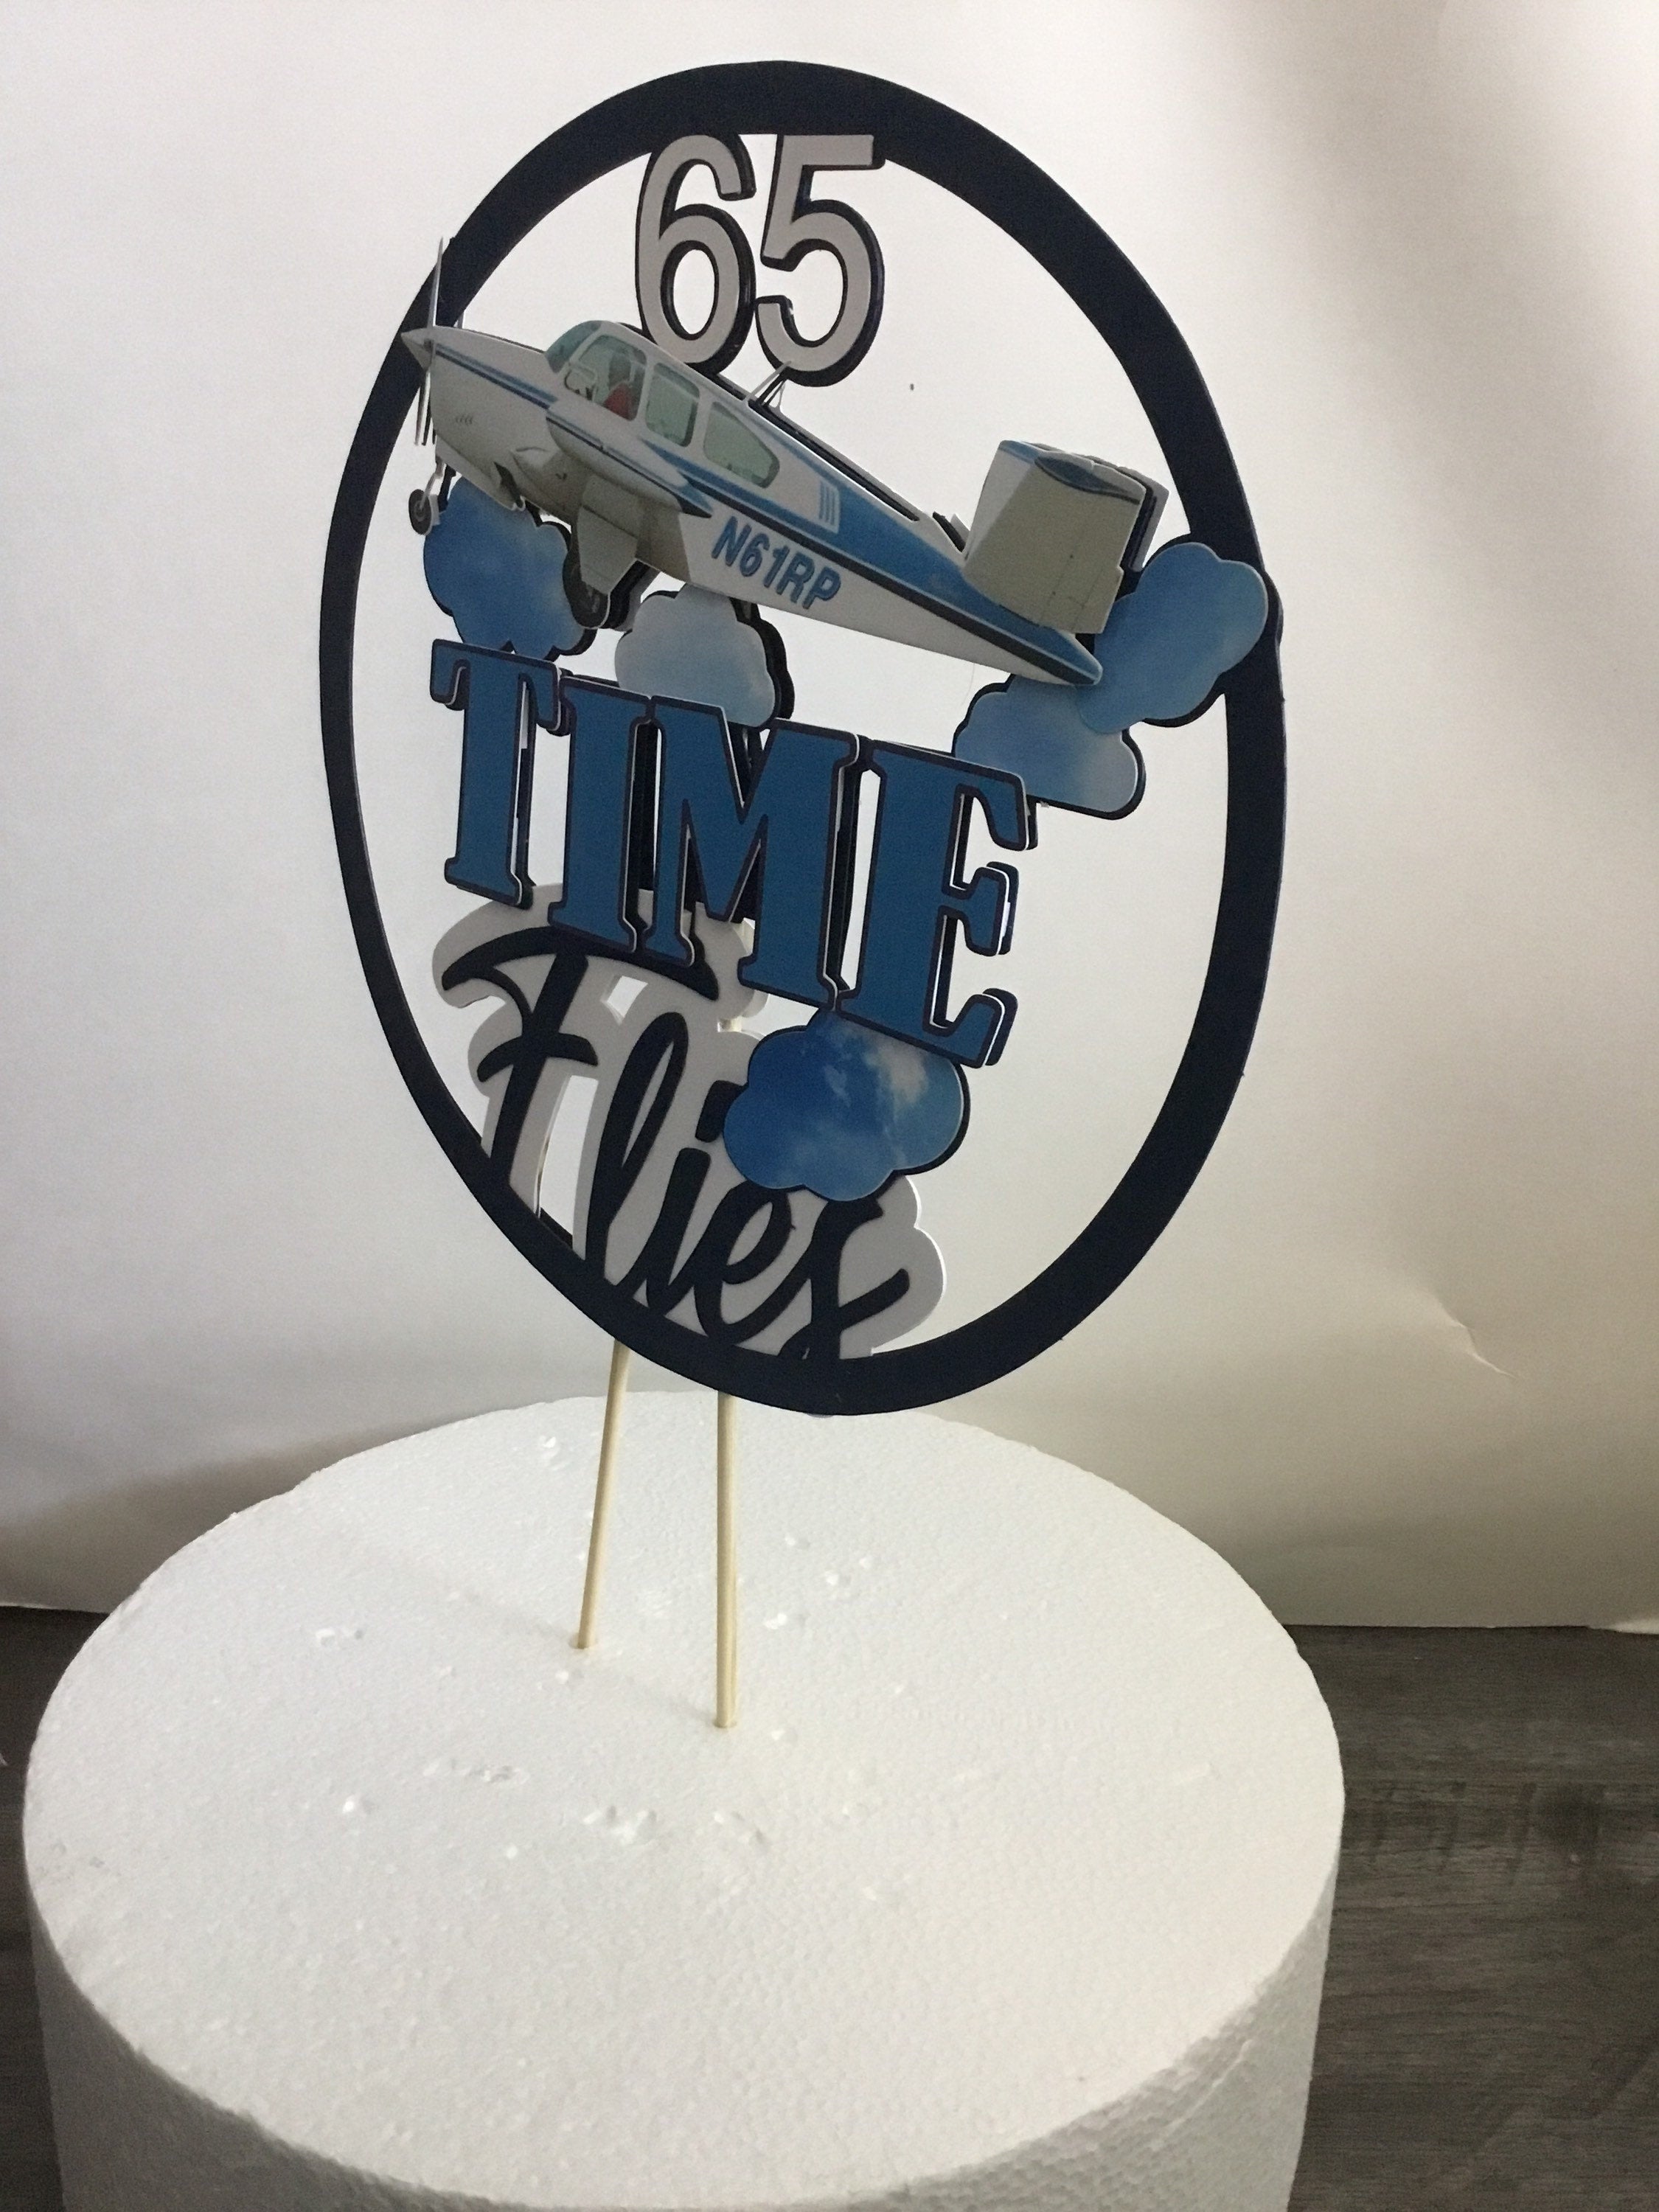 Discover more than 165 vintage airplane cake topper latest -  awesomeenglish.edu.vn